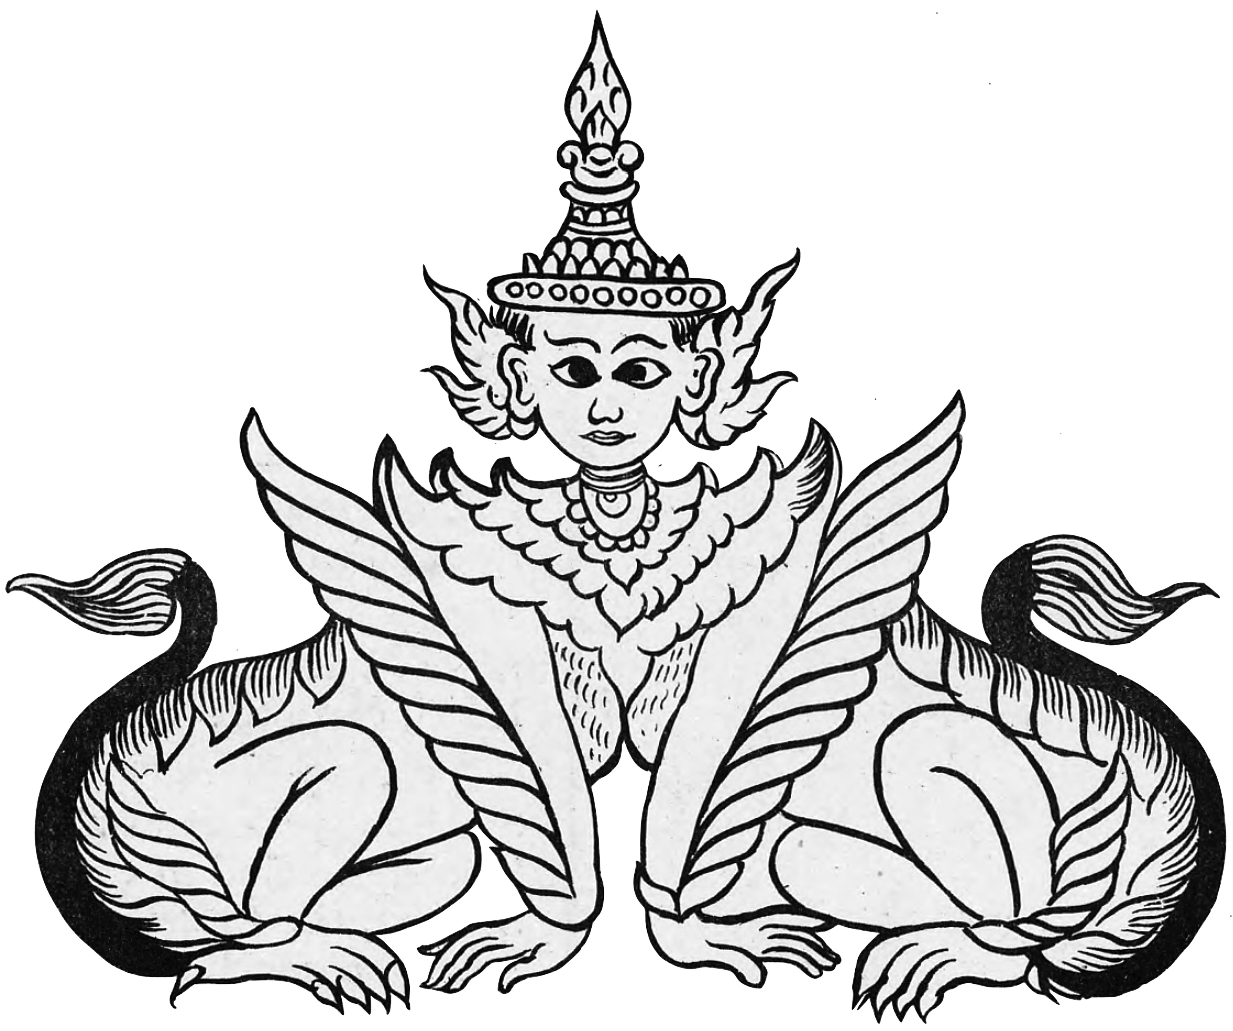 Manussiha (Manokthiha) in Burmese representation, sourced from The Thirty Seven Nats by Sir Richaard Carmac Temple, 1906.